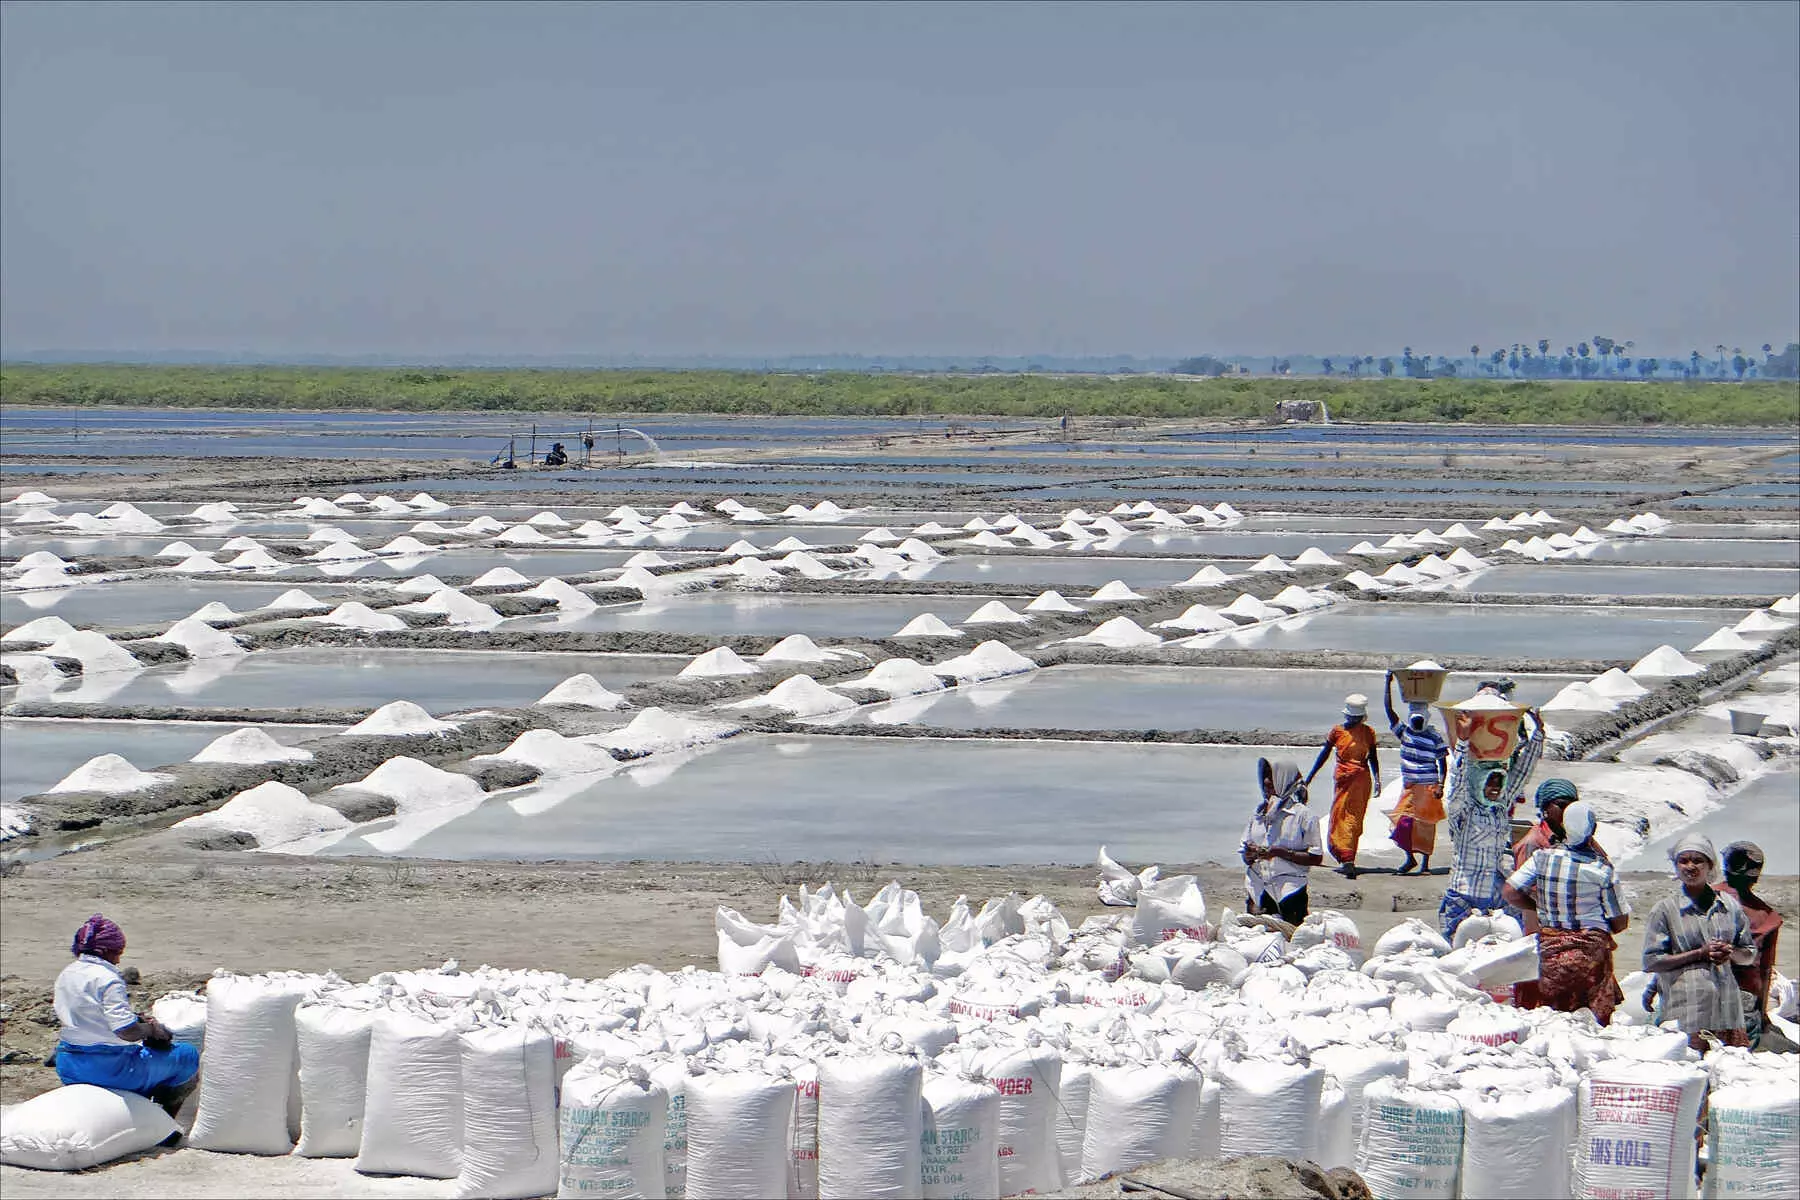 90% of workers in Tamil Nadu’s salt pans working above recommended heat exposure: Study